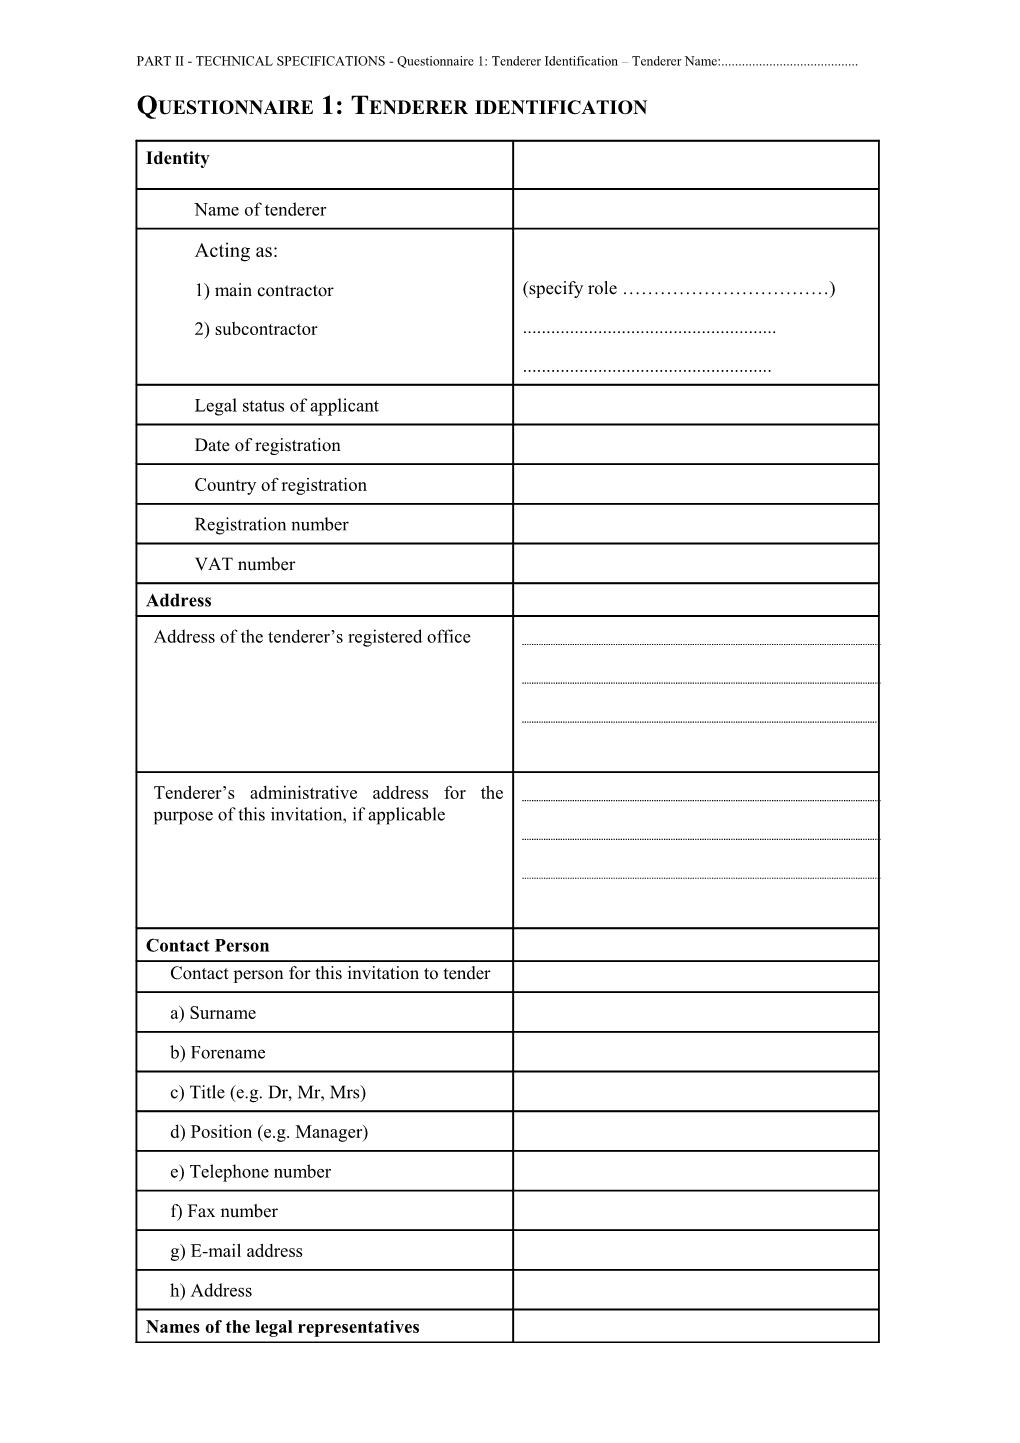 1. Standard Reply Forms